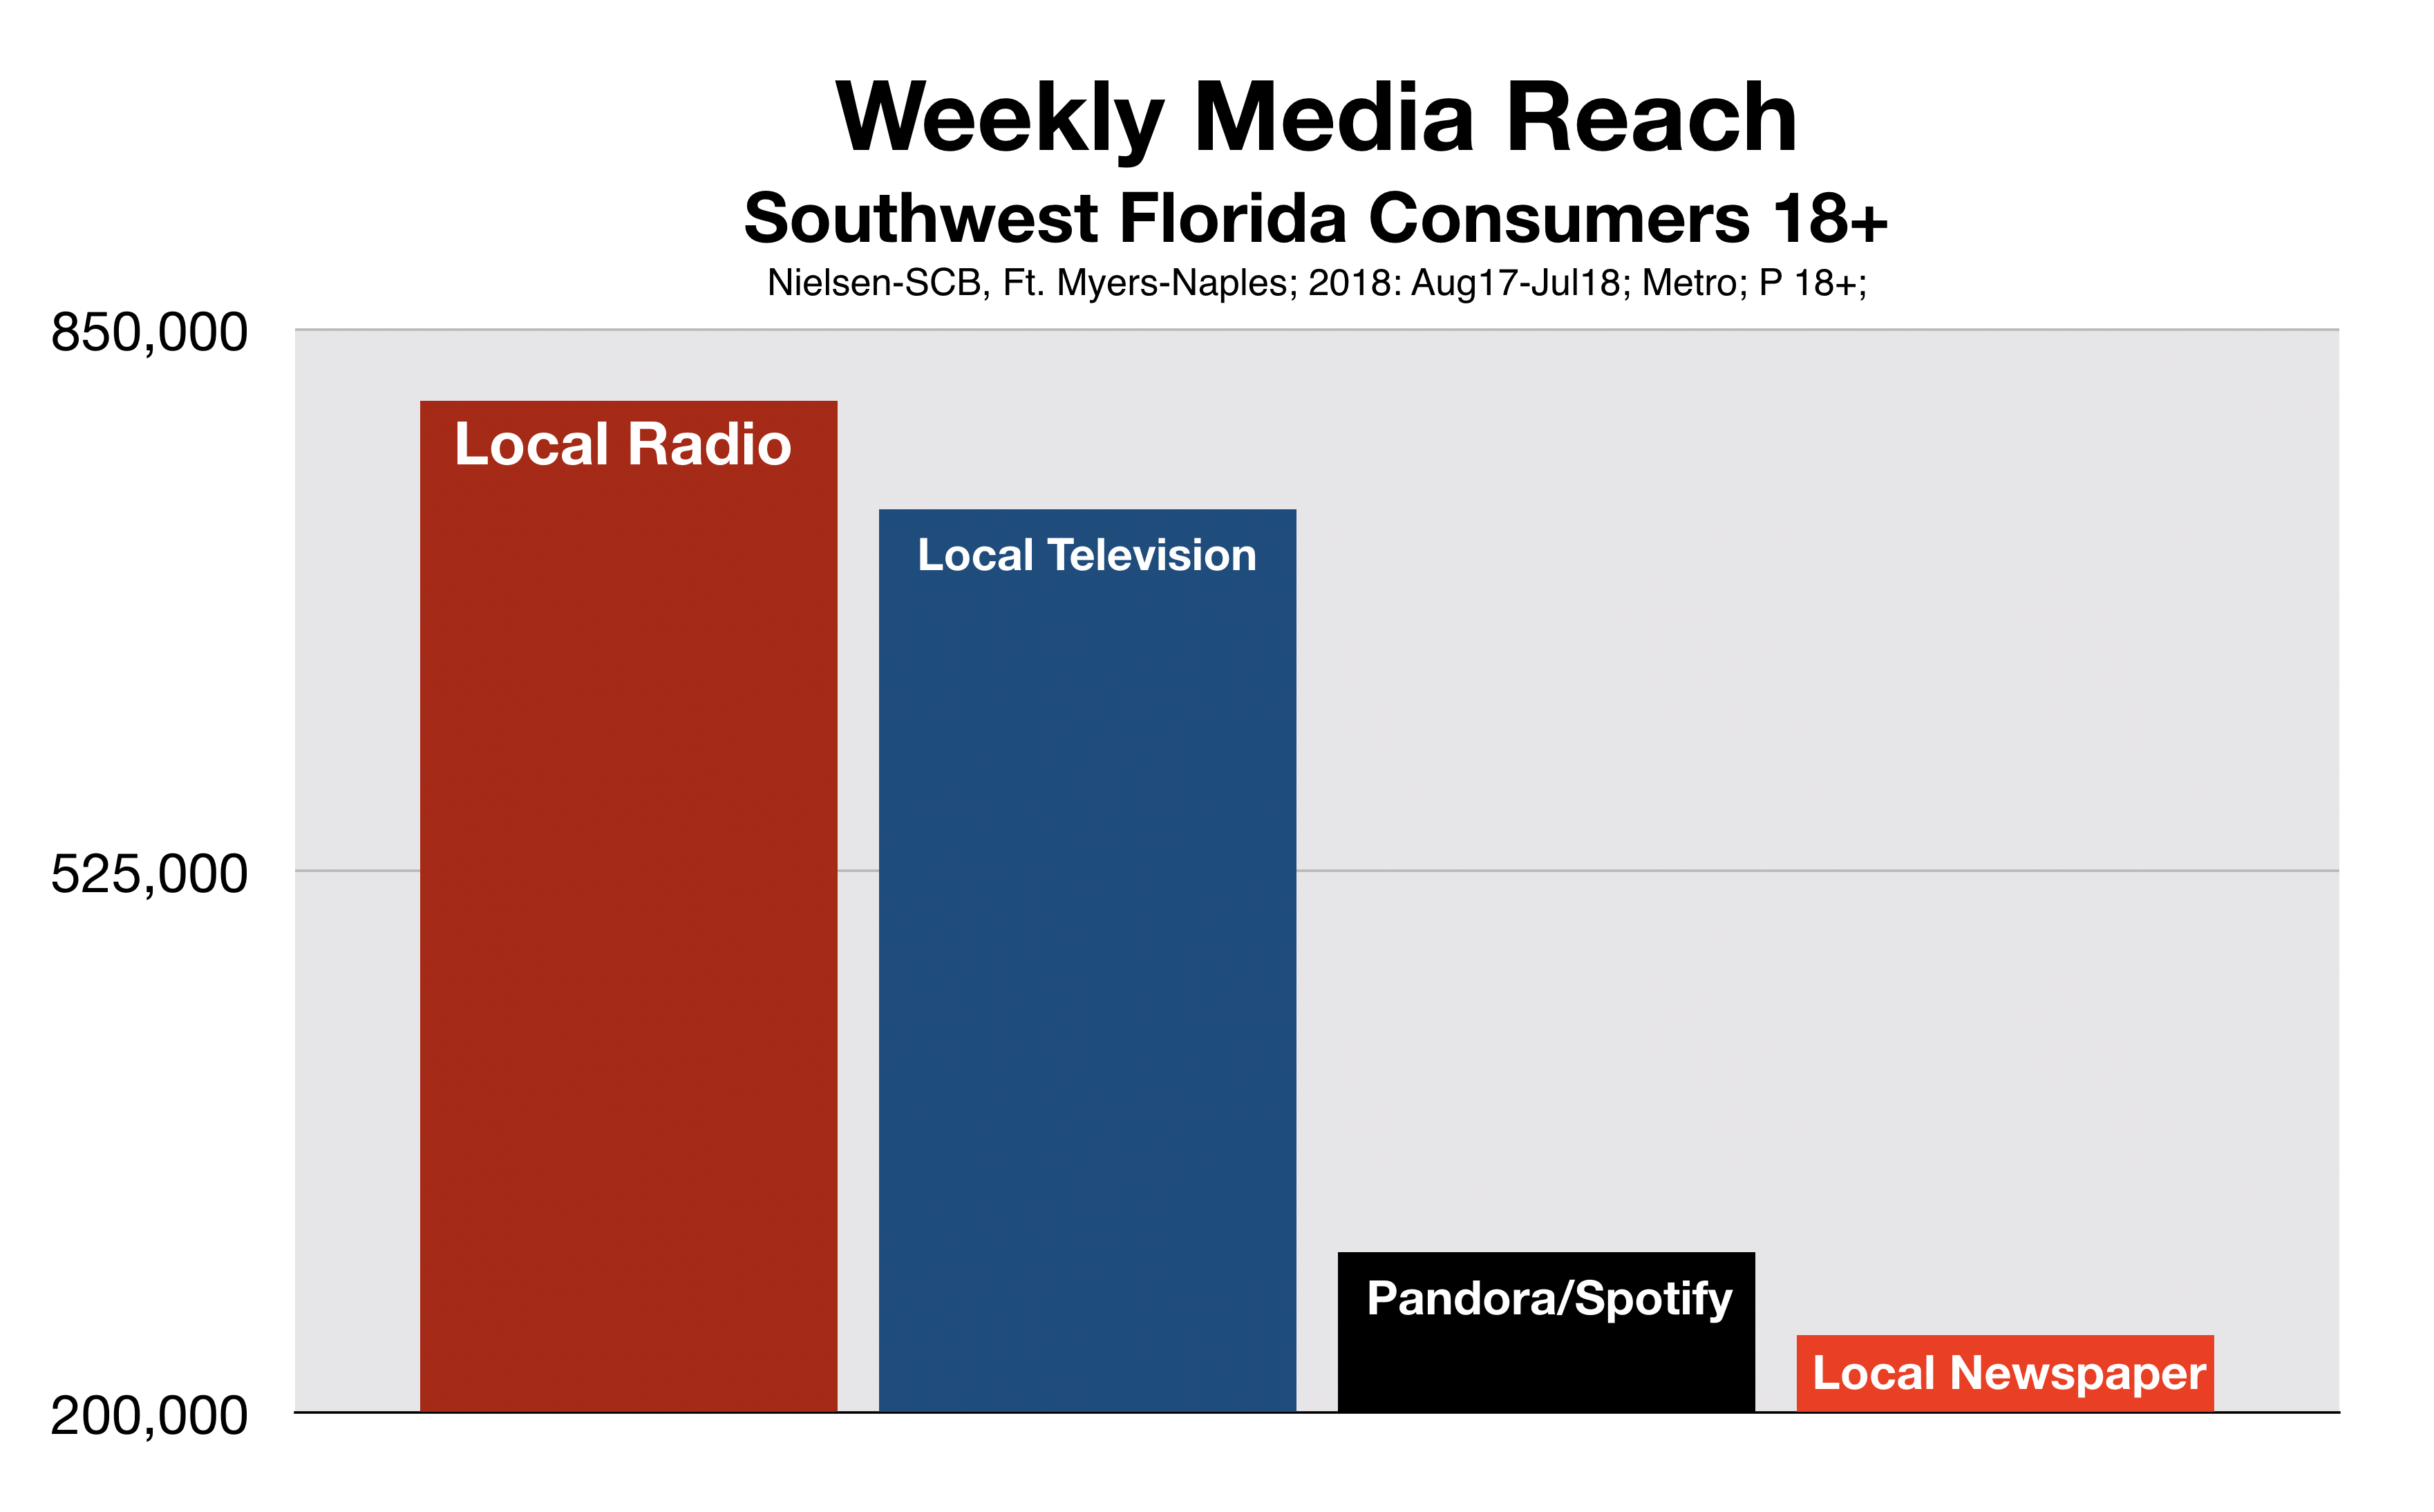 Advertise In Fort Myers Total Reach Including Pandora/Spotify